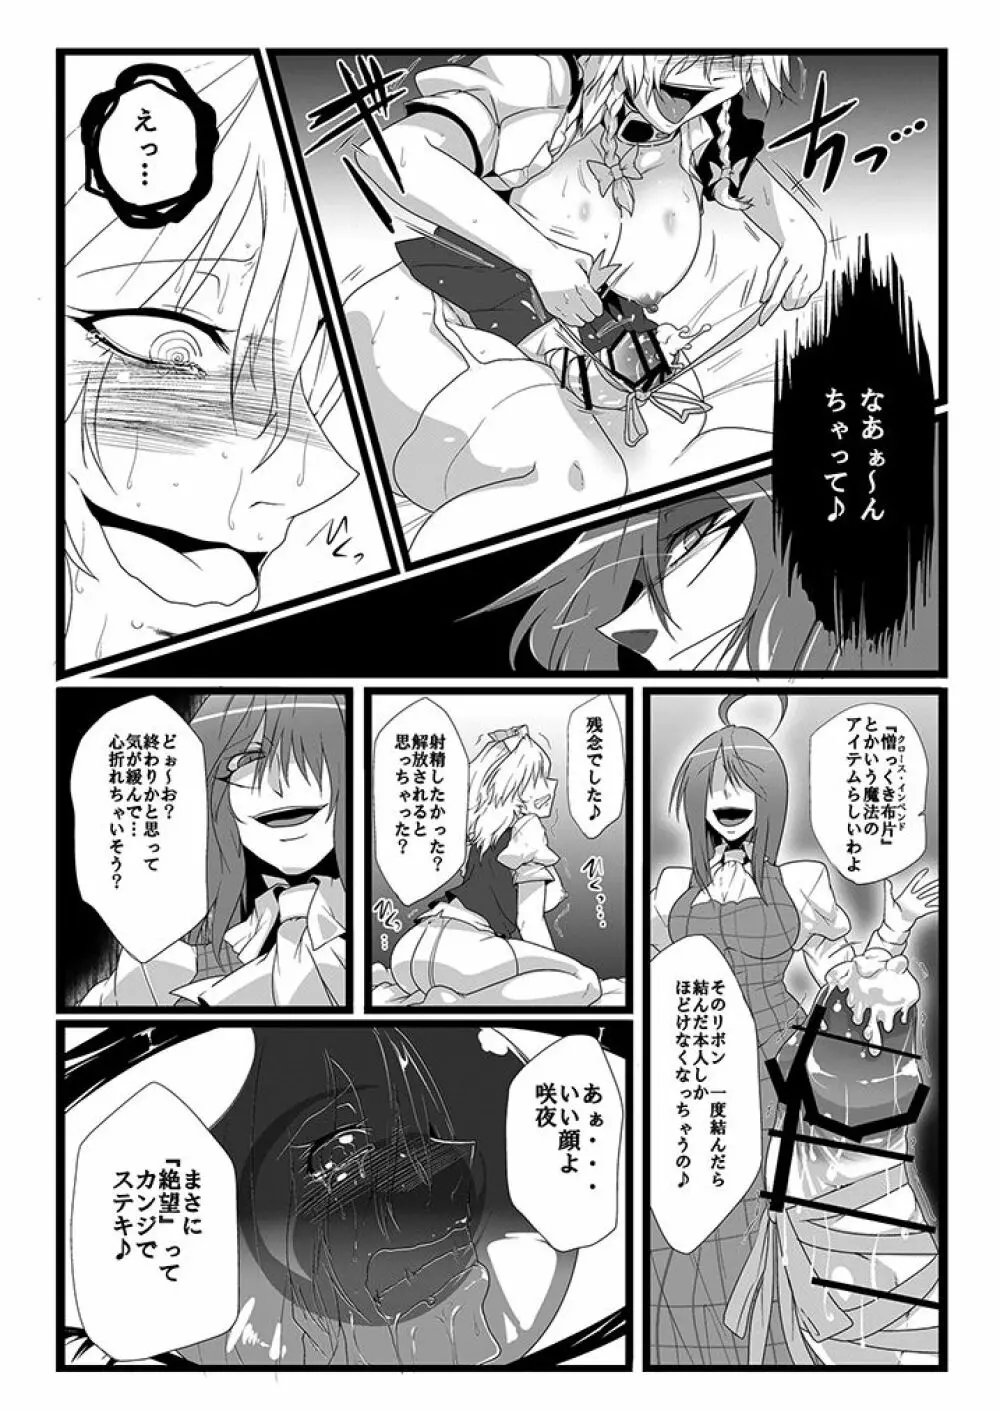 SAKUYA MAID in HEAVEN/ALL IN 1 - page254